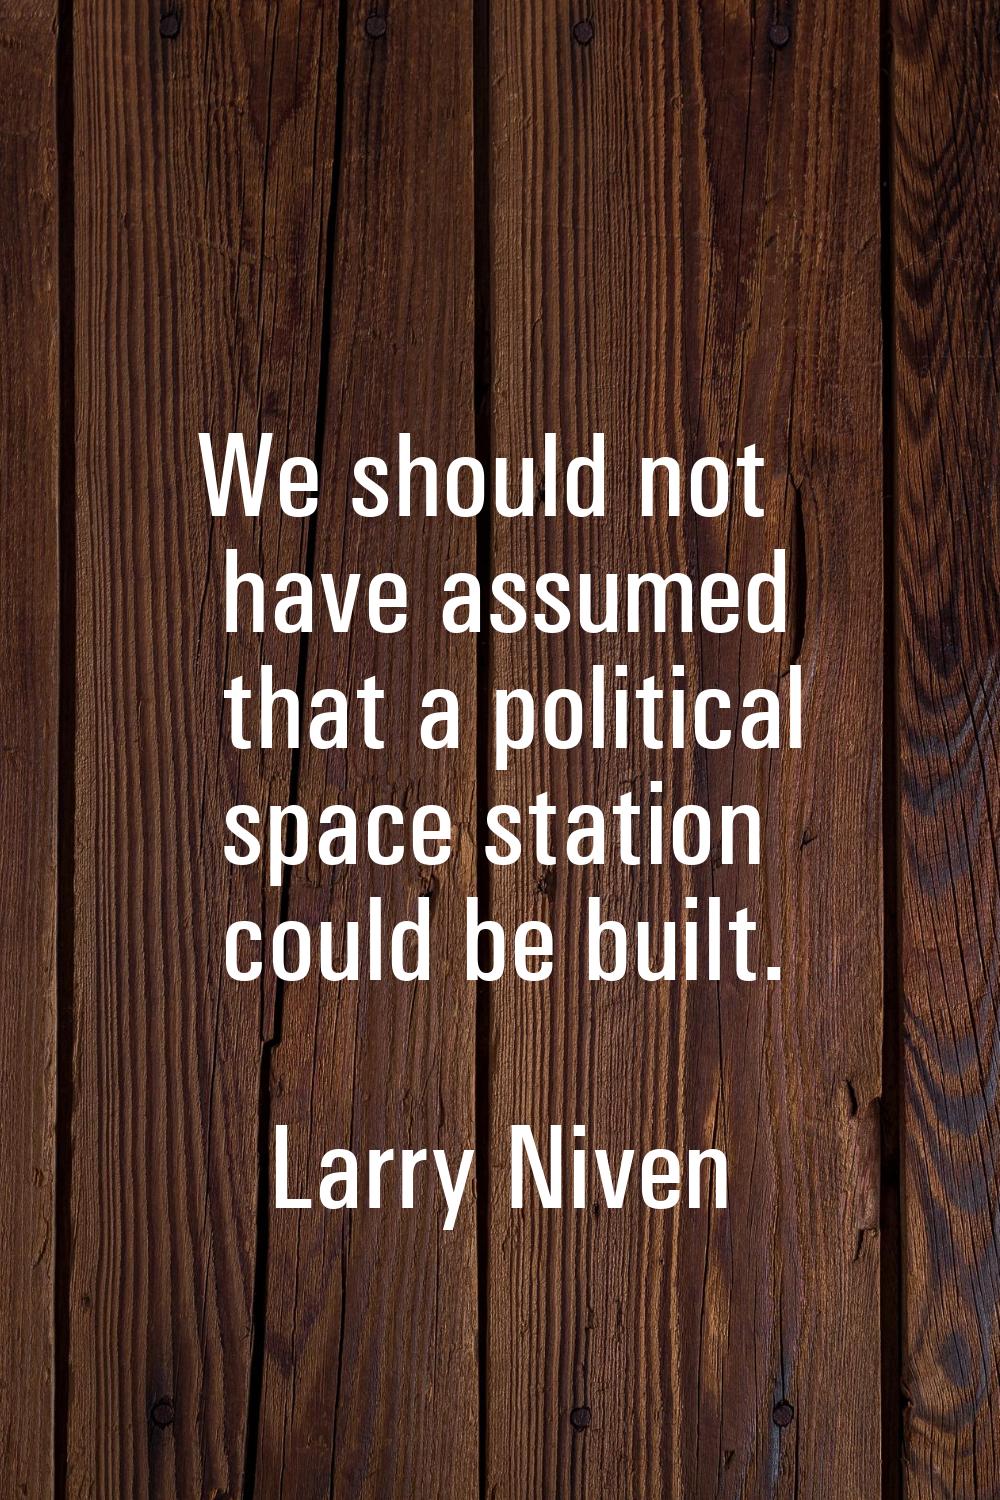 We should not have assumed that a political space station could be built.